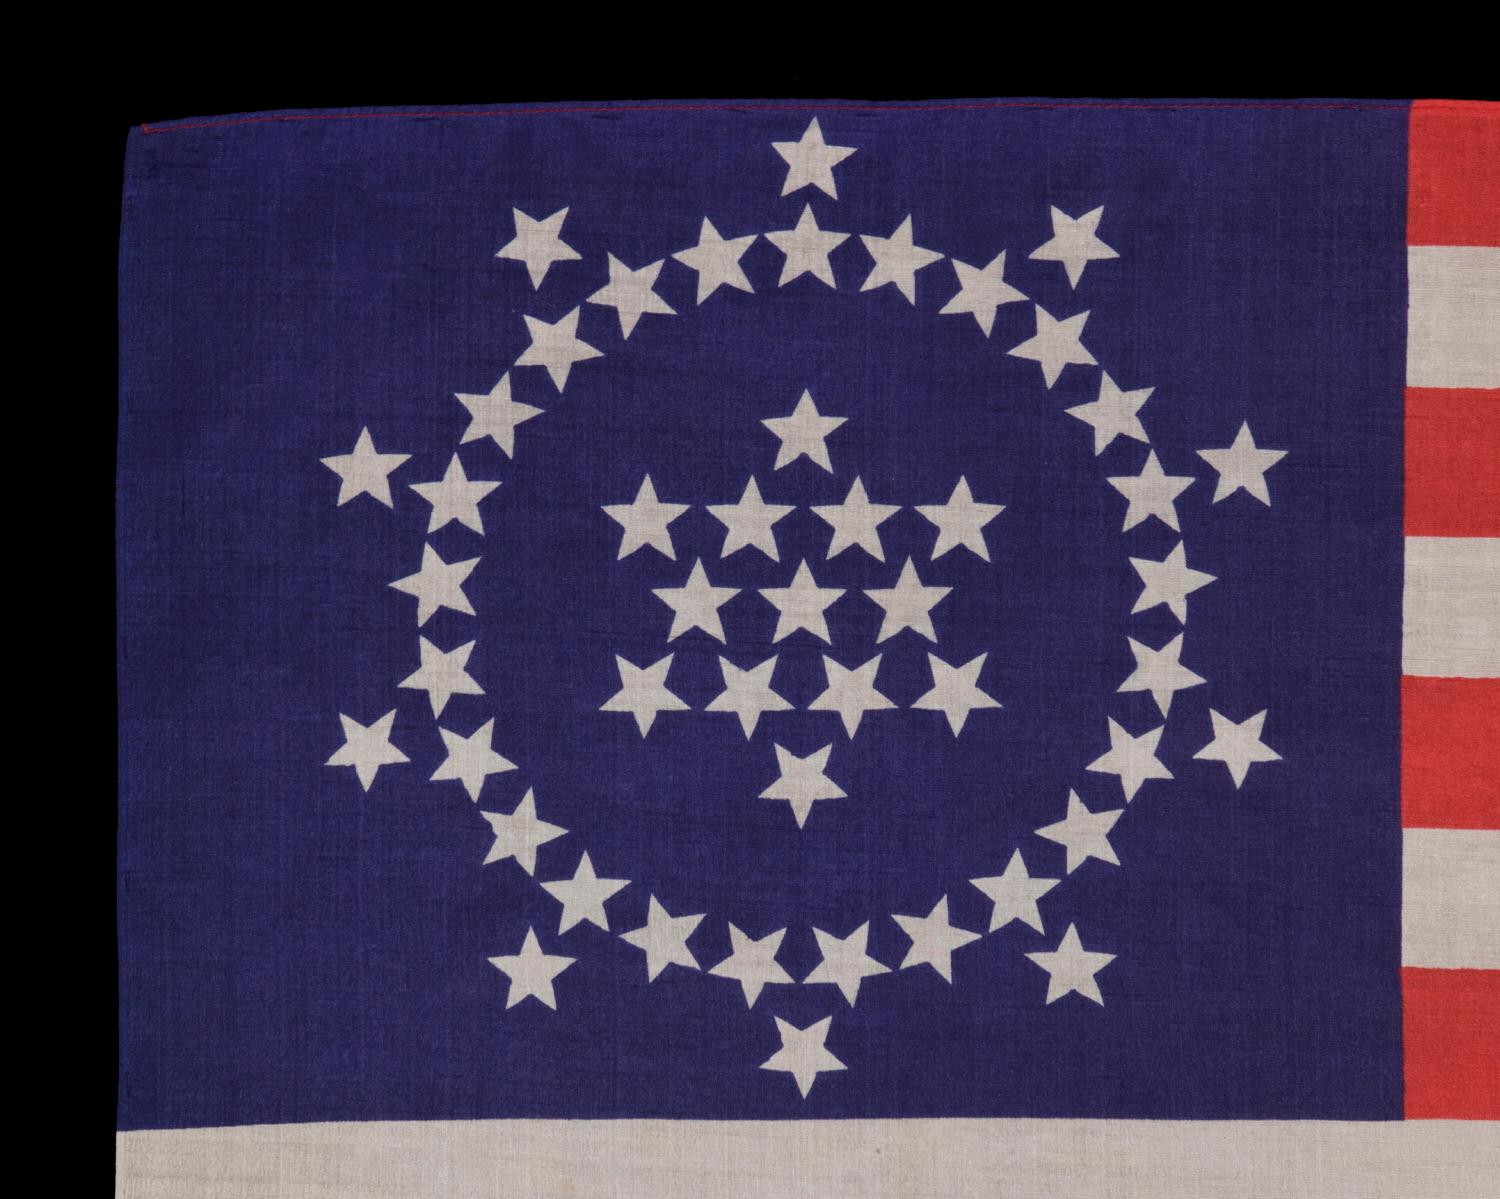 48 STARS ON AN ANTIQUE AMERICAN FLAG DESIGNED AND COMMISSIONED BY WAYNE WHIPPLE, 1911-1912, A RARE AND HIGHLY DESIRED, SILK EXAMPLE 

Many people are not aware that for the first 135 years of the existence of the American national flag, there was no